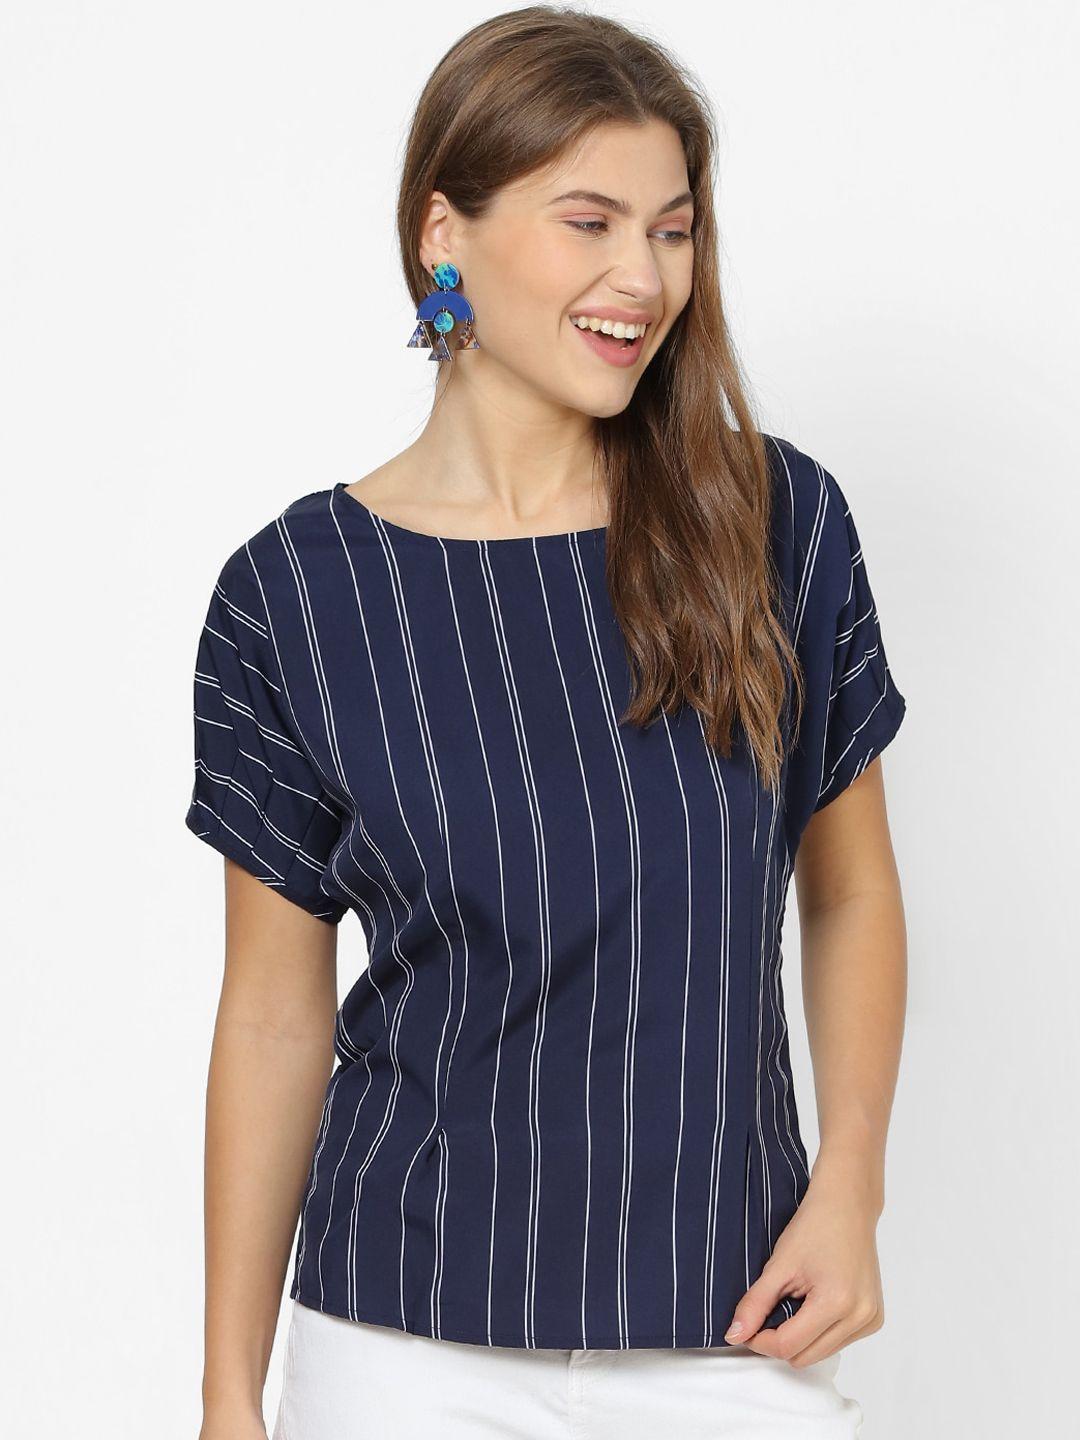 forever 21 women navy blue striped top